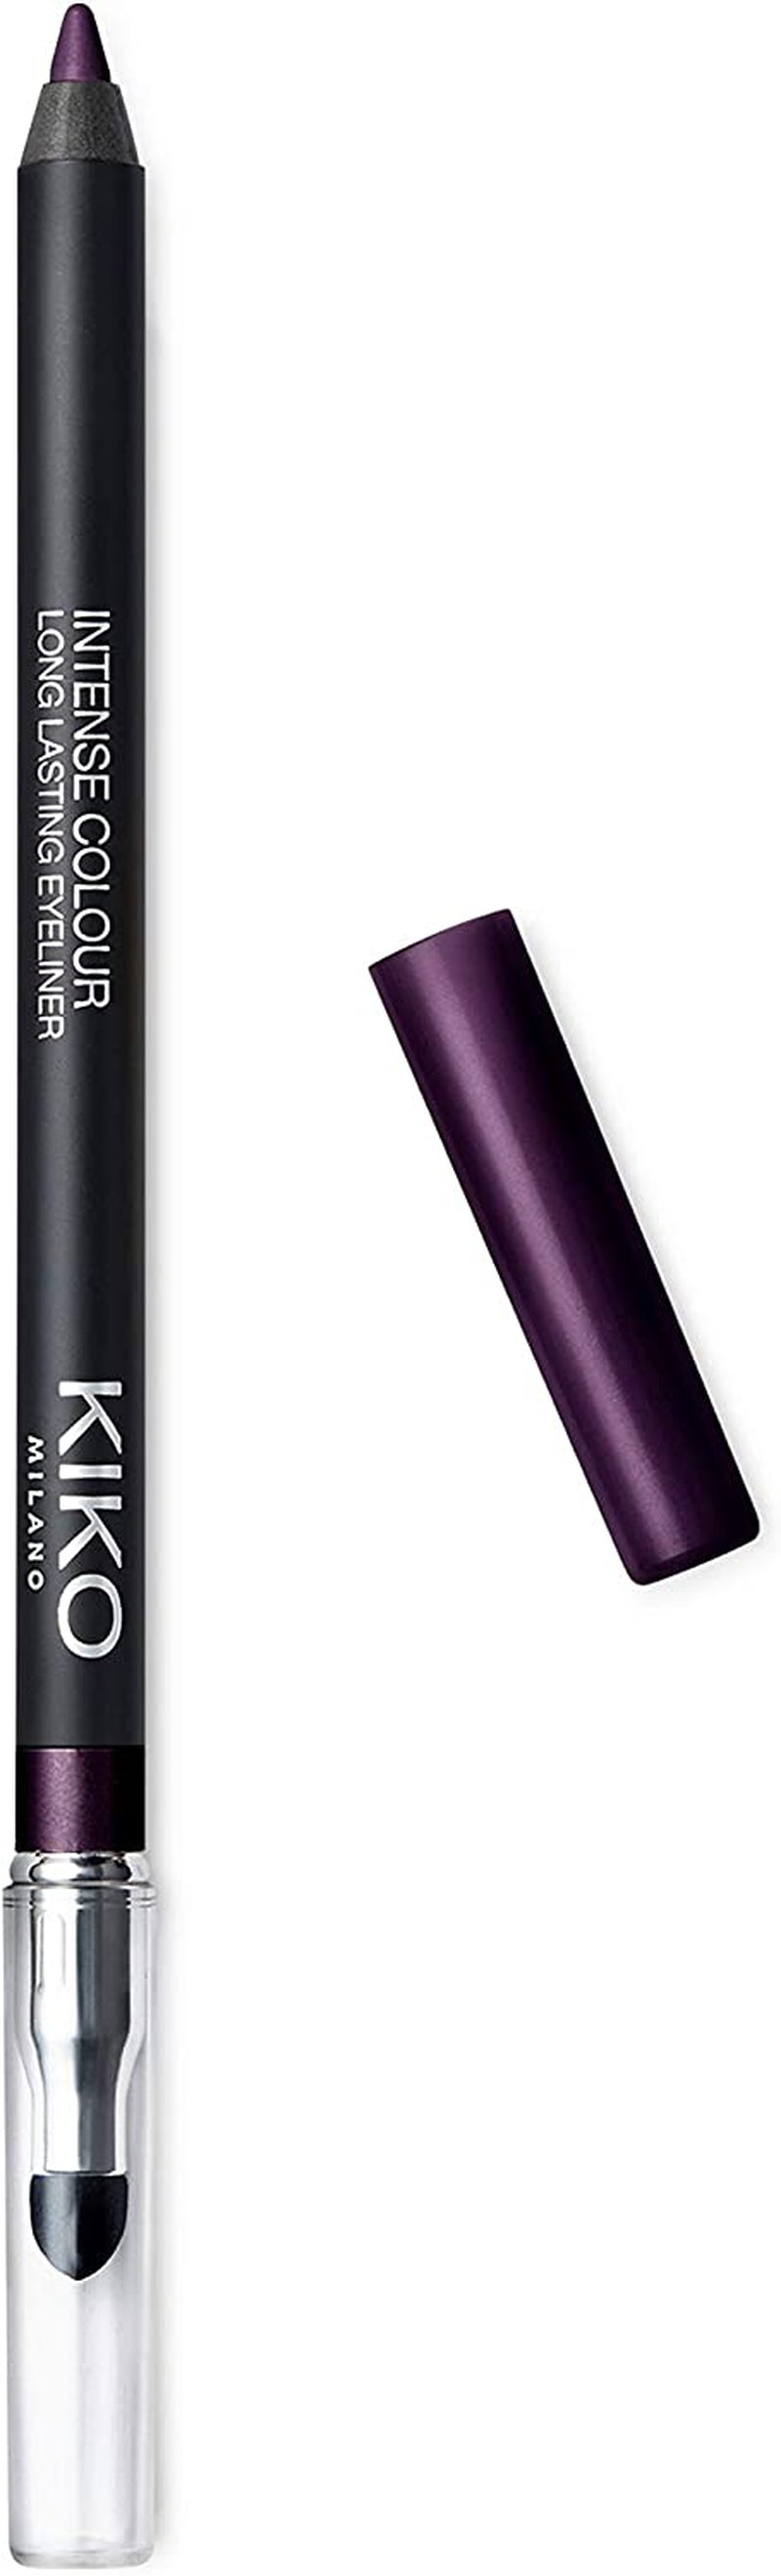 Intense Colour Long Lasting Eyeliner 05 | Intense and Smooth-Gliding Outer Eye Pencil with Long Wear